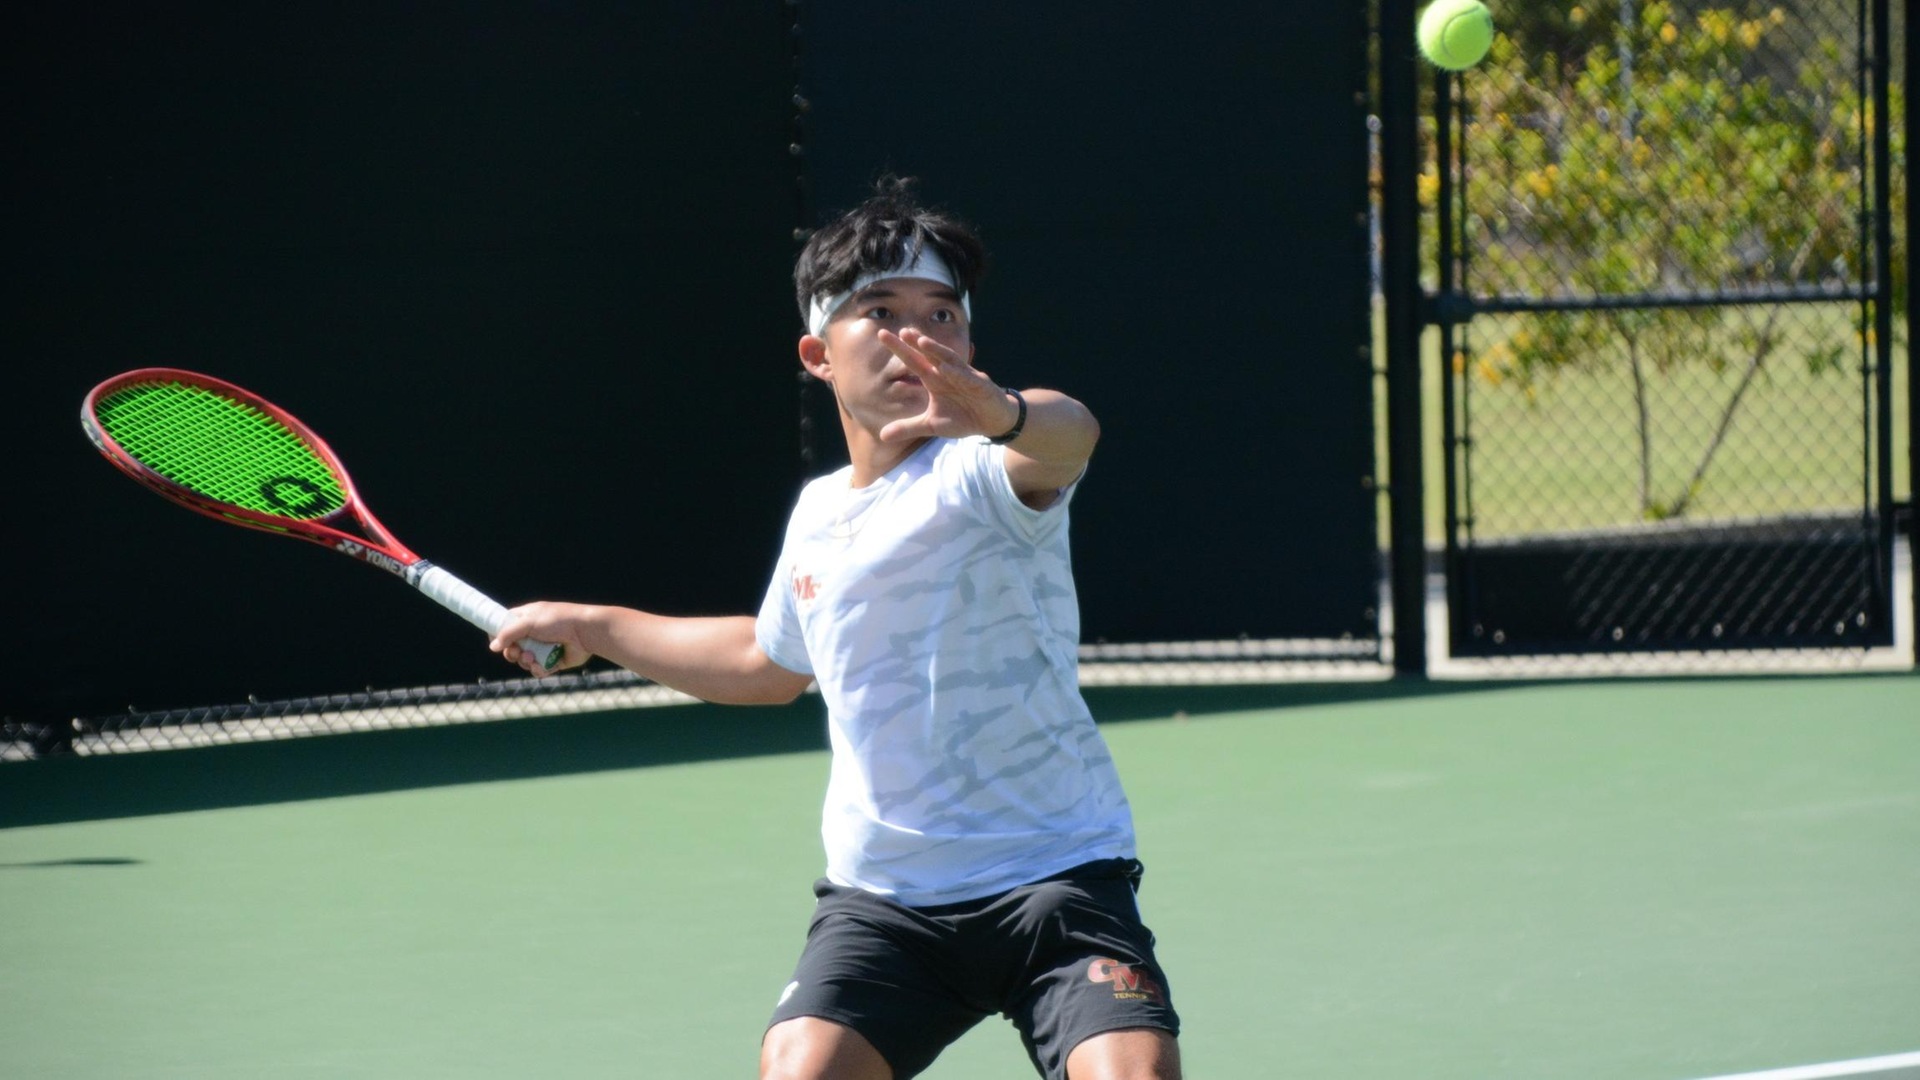 Michael Hao was 4-0 on the day with two singles and two doubles wins